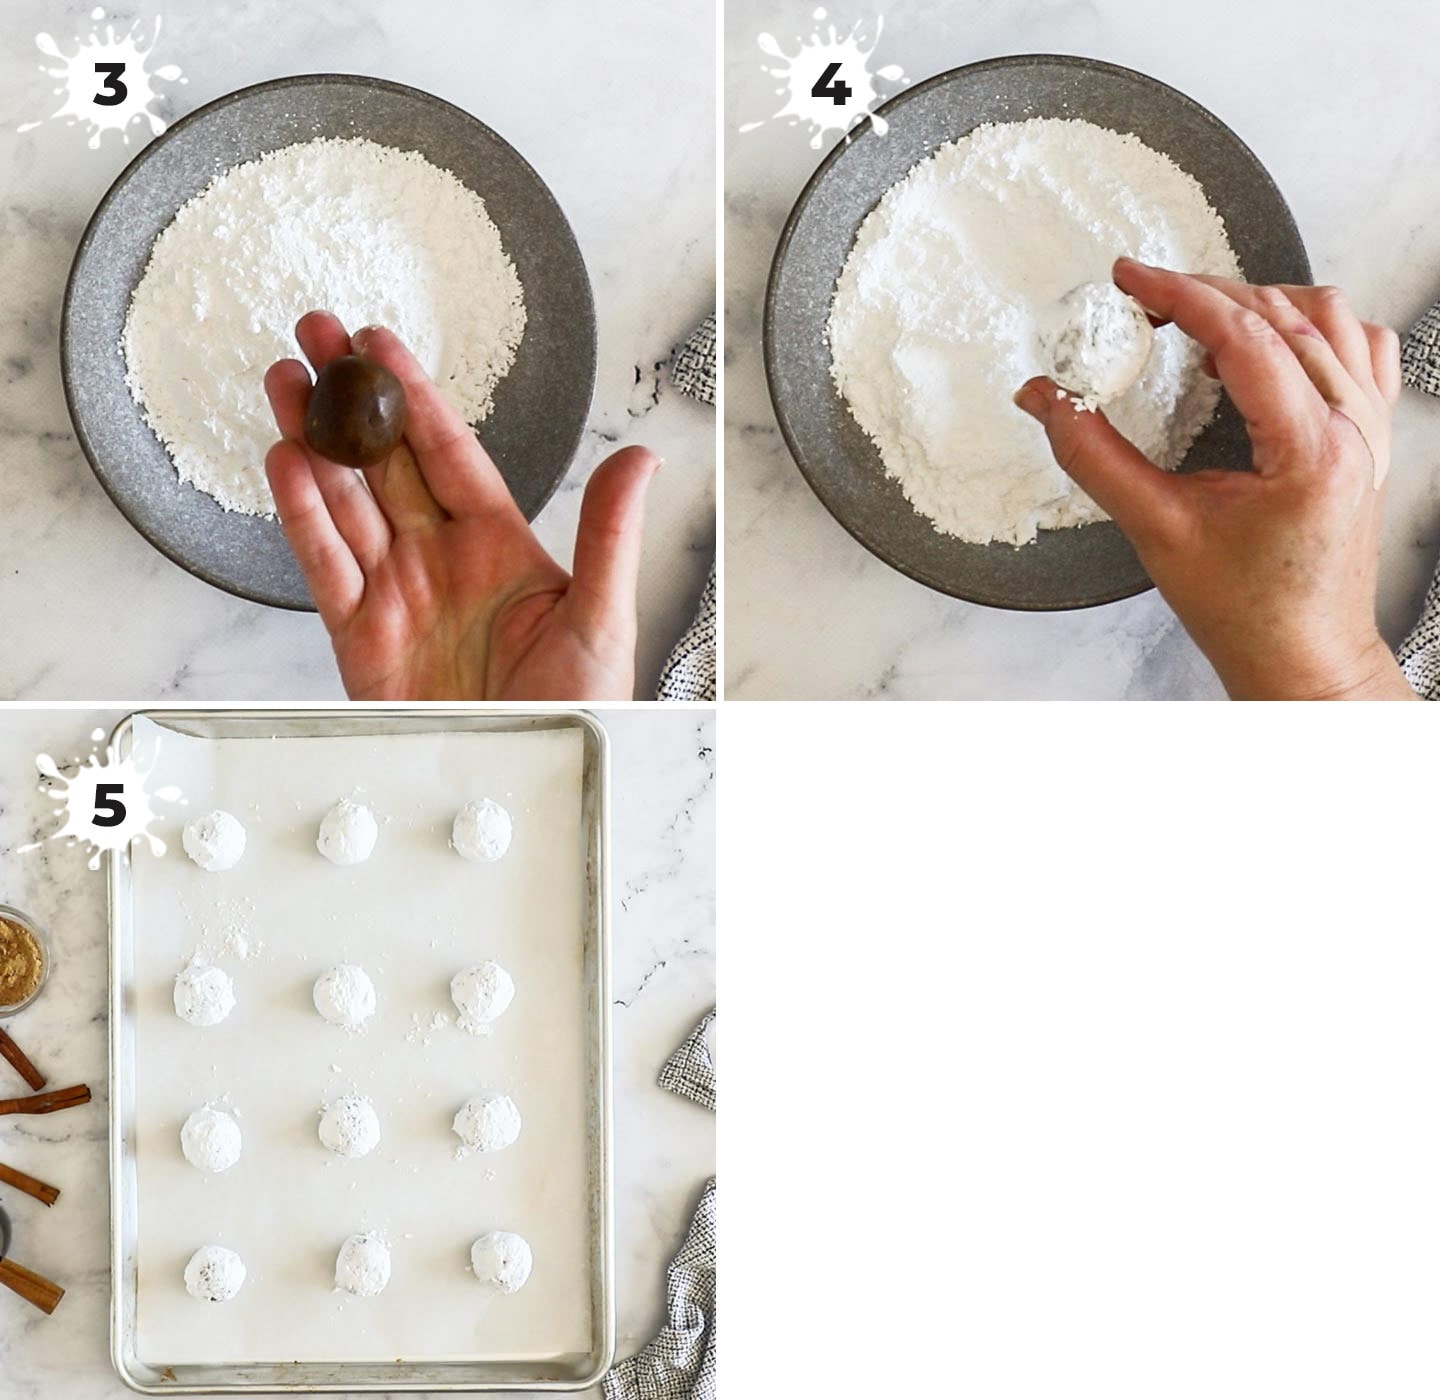 A collage showing how to roll and coat the dough balls.